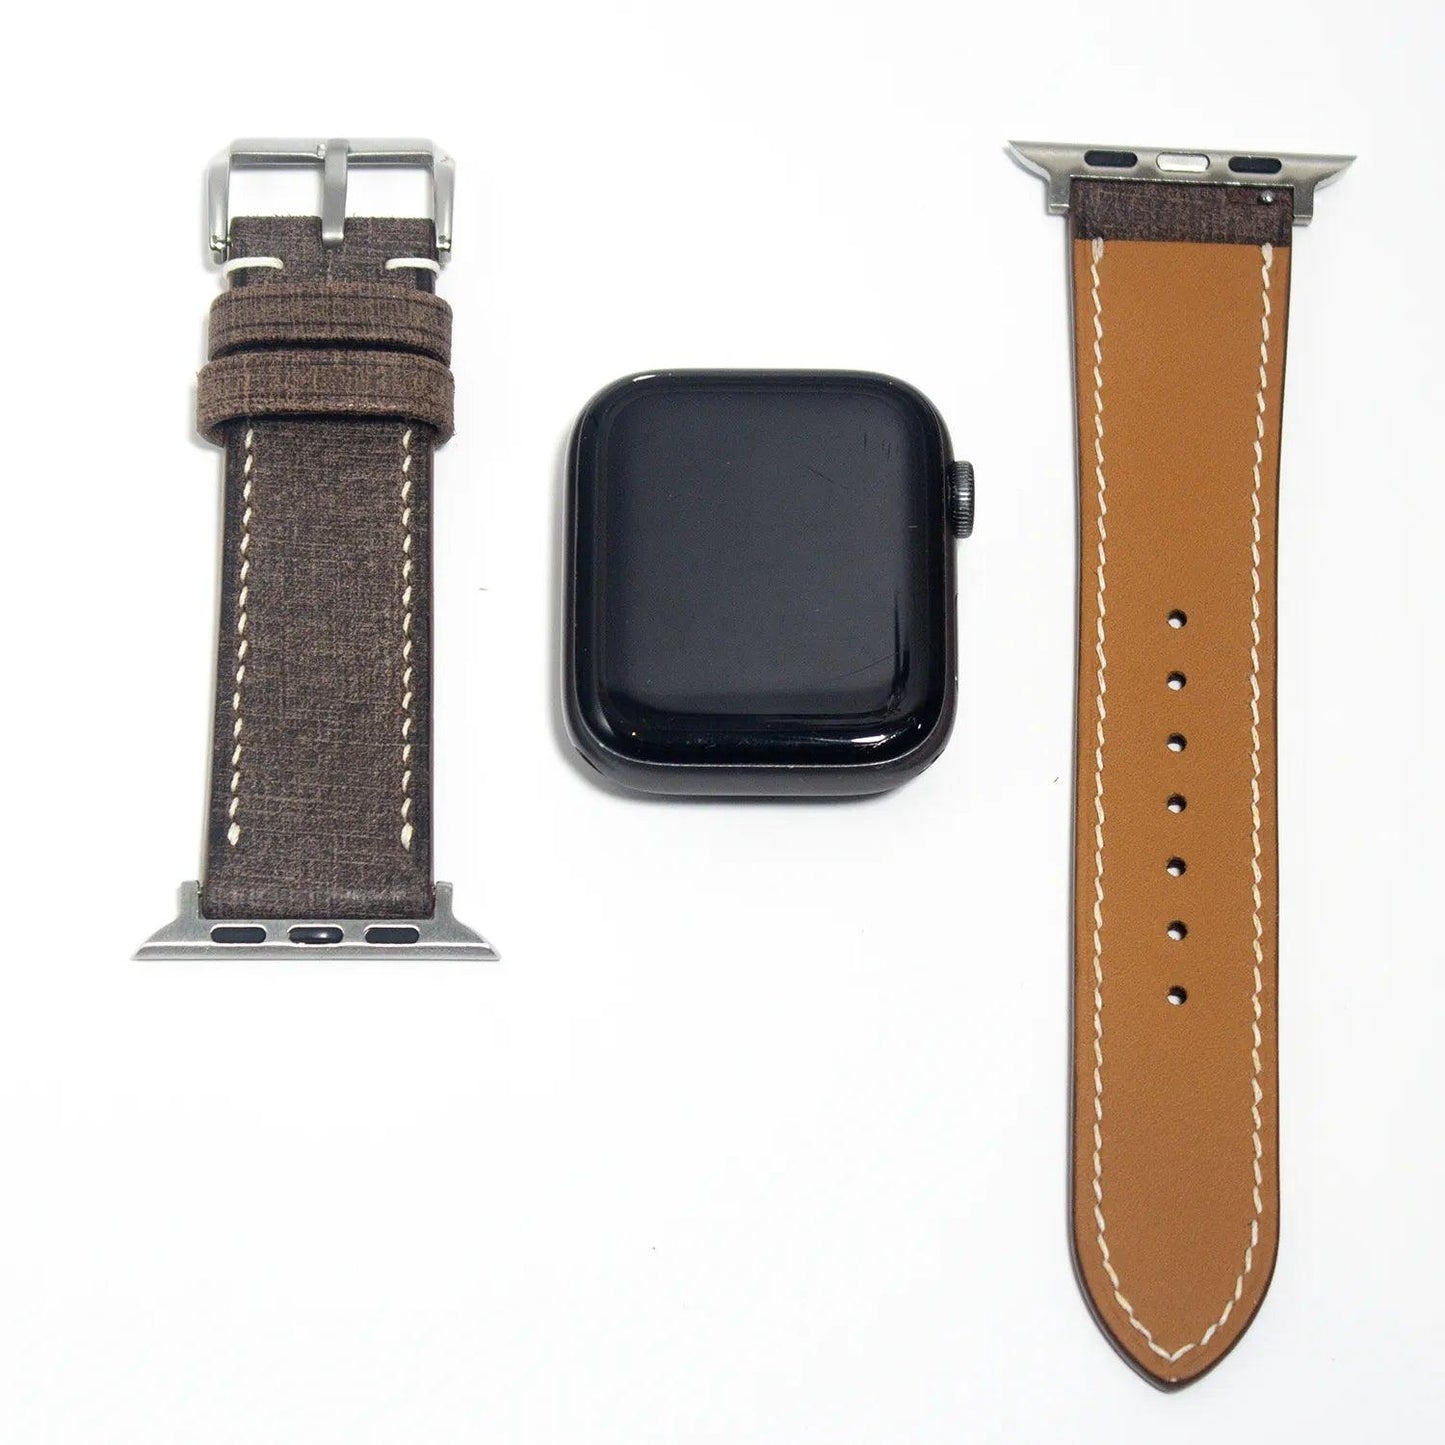 High-quality leather watch straps in brown Babele leather, offering durability and timeless style.